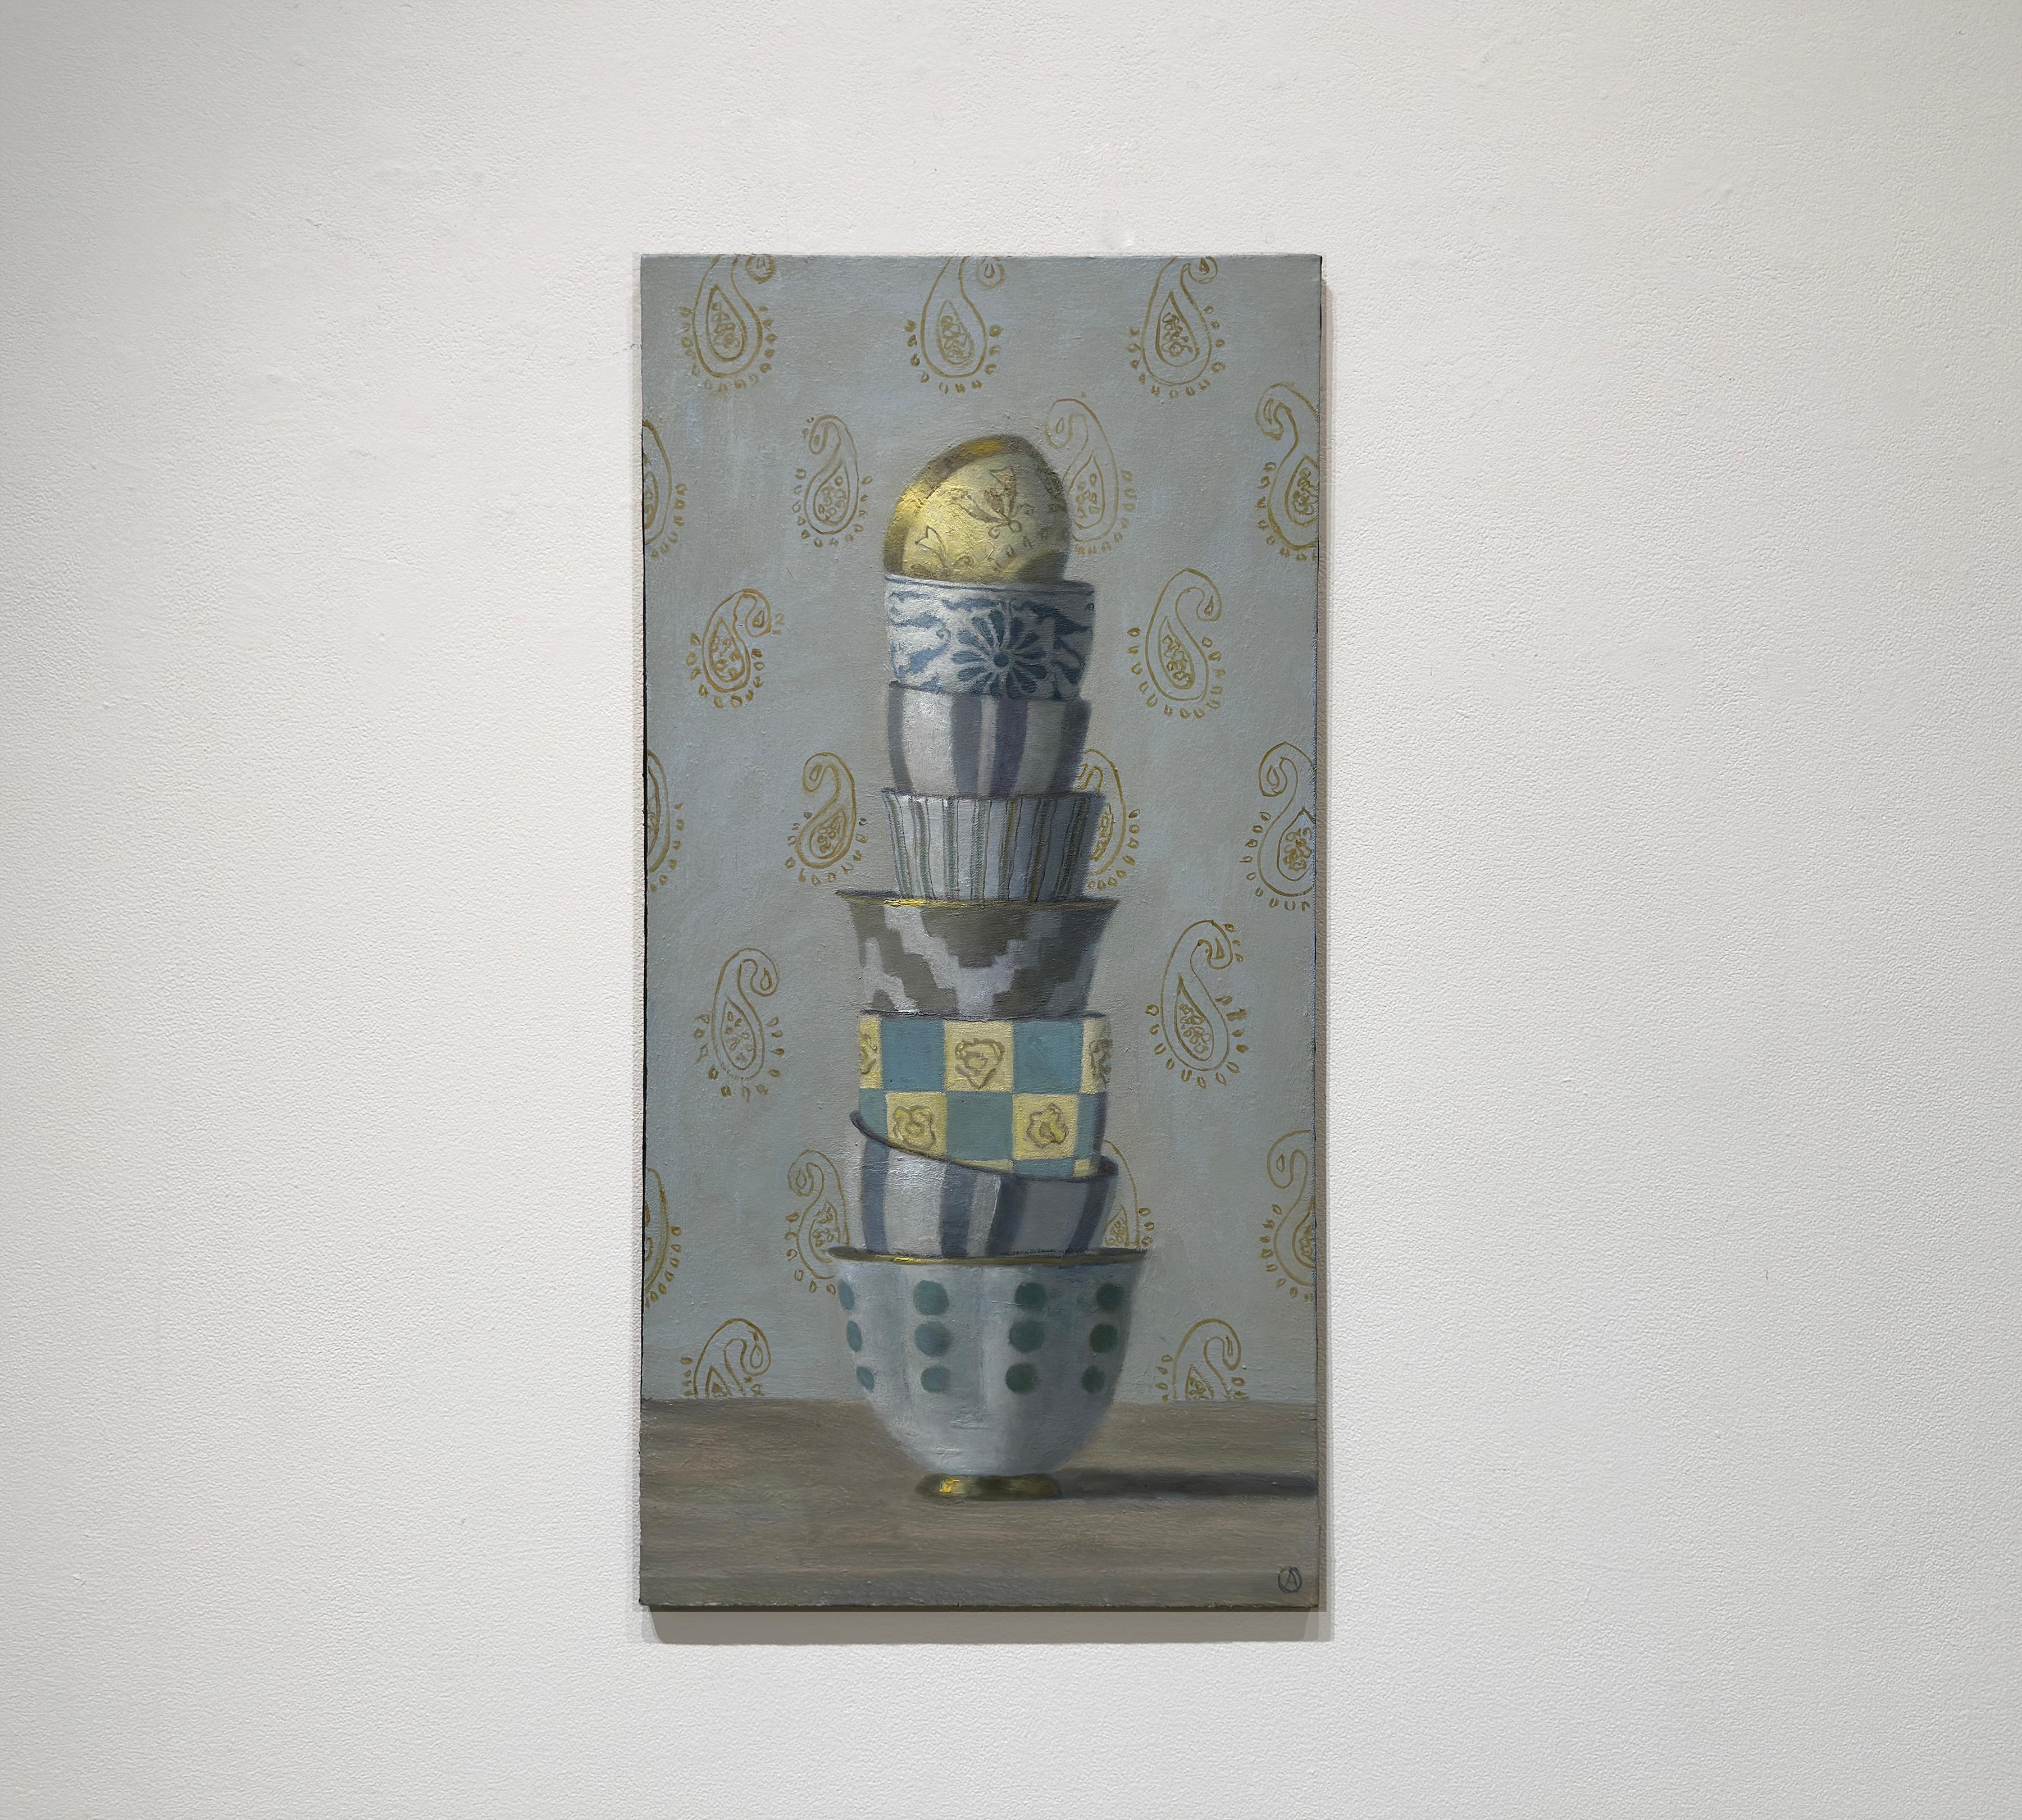 CUP TOWER AND GOLD FILIGREE - Contemporary Realism / Domestic Still Life - Painting by Olga Antonova